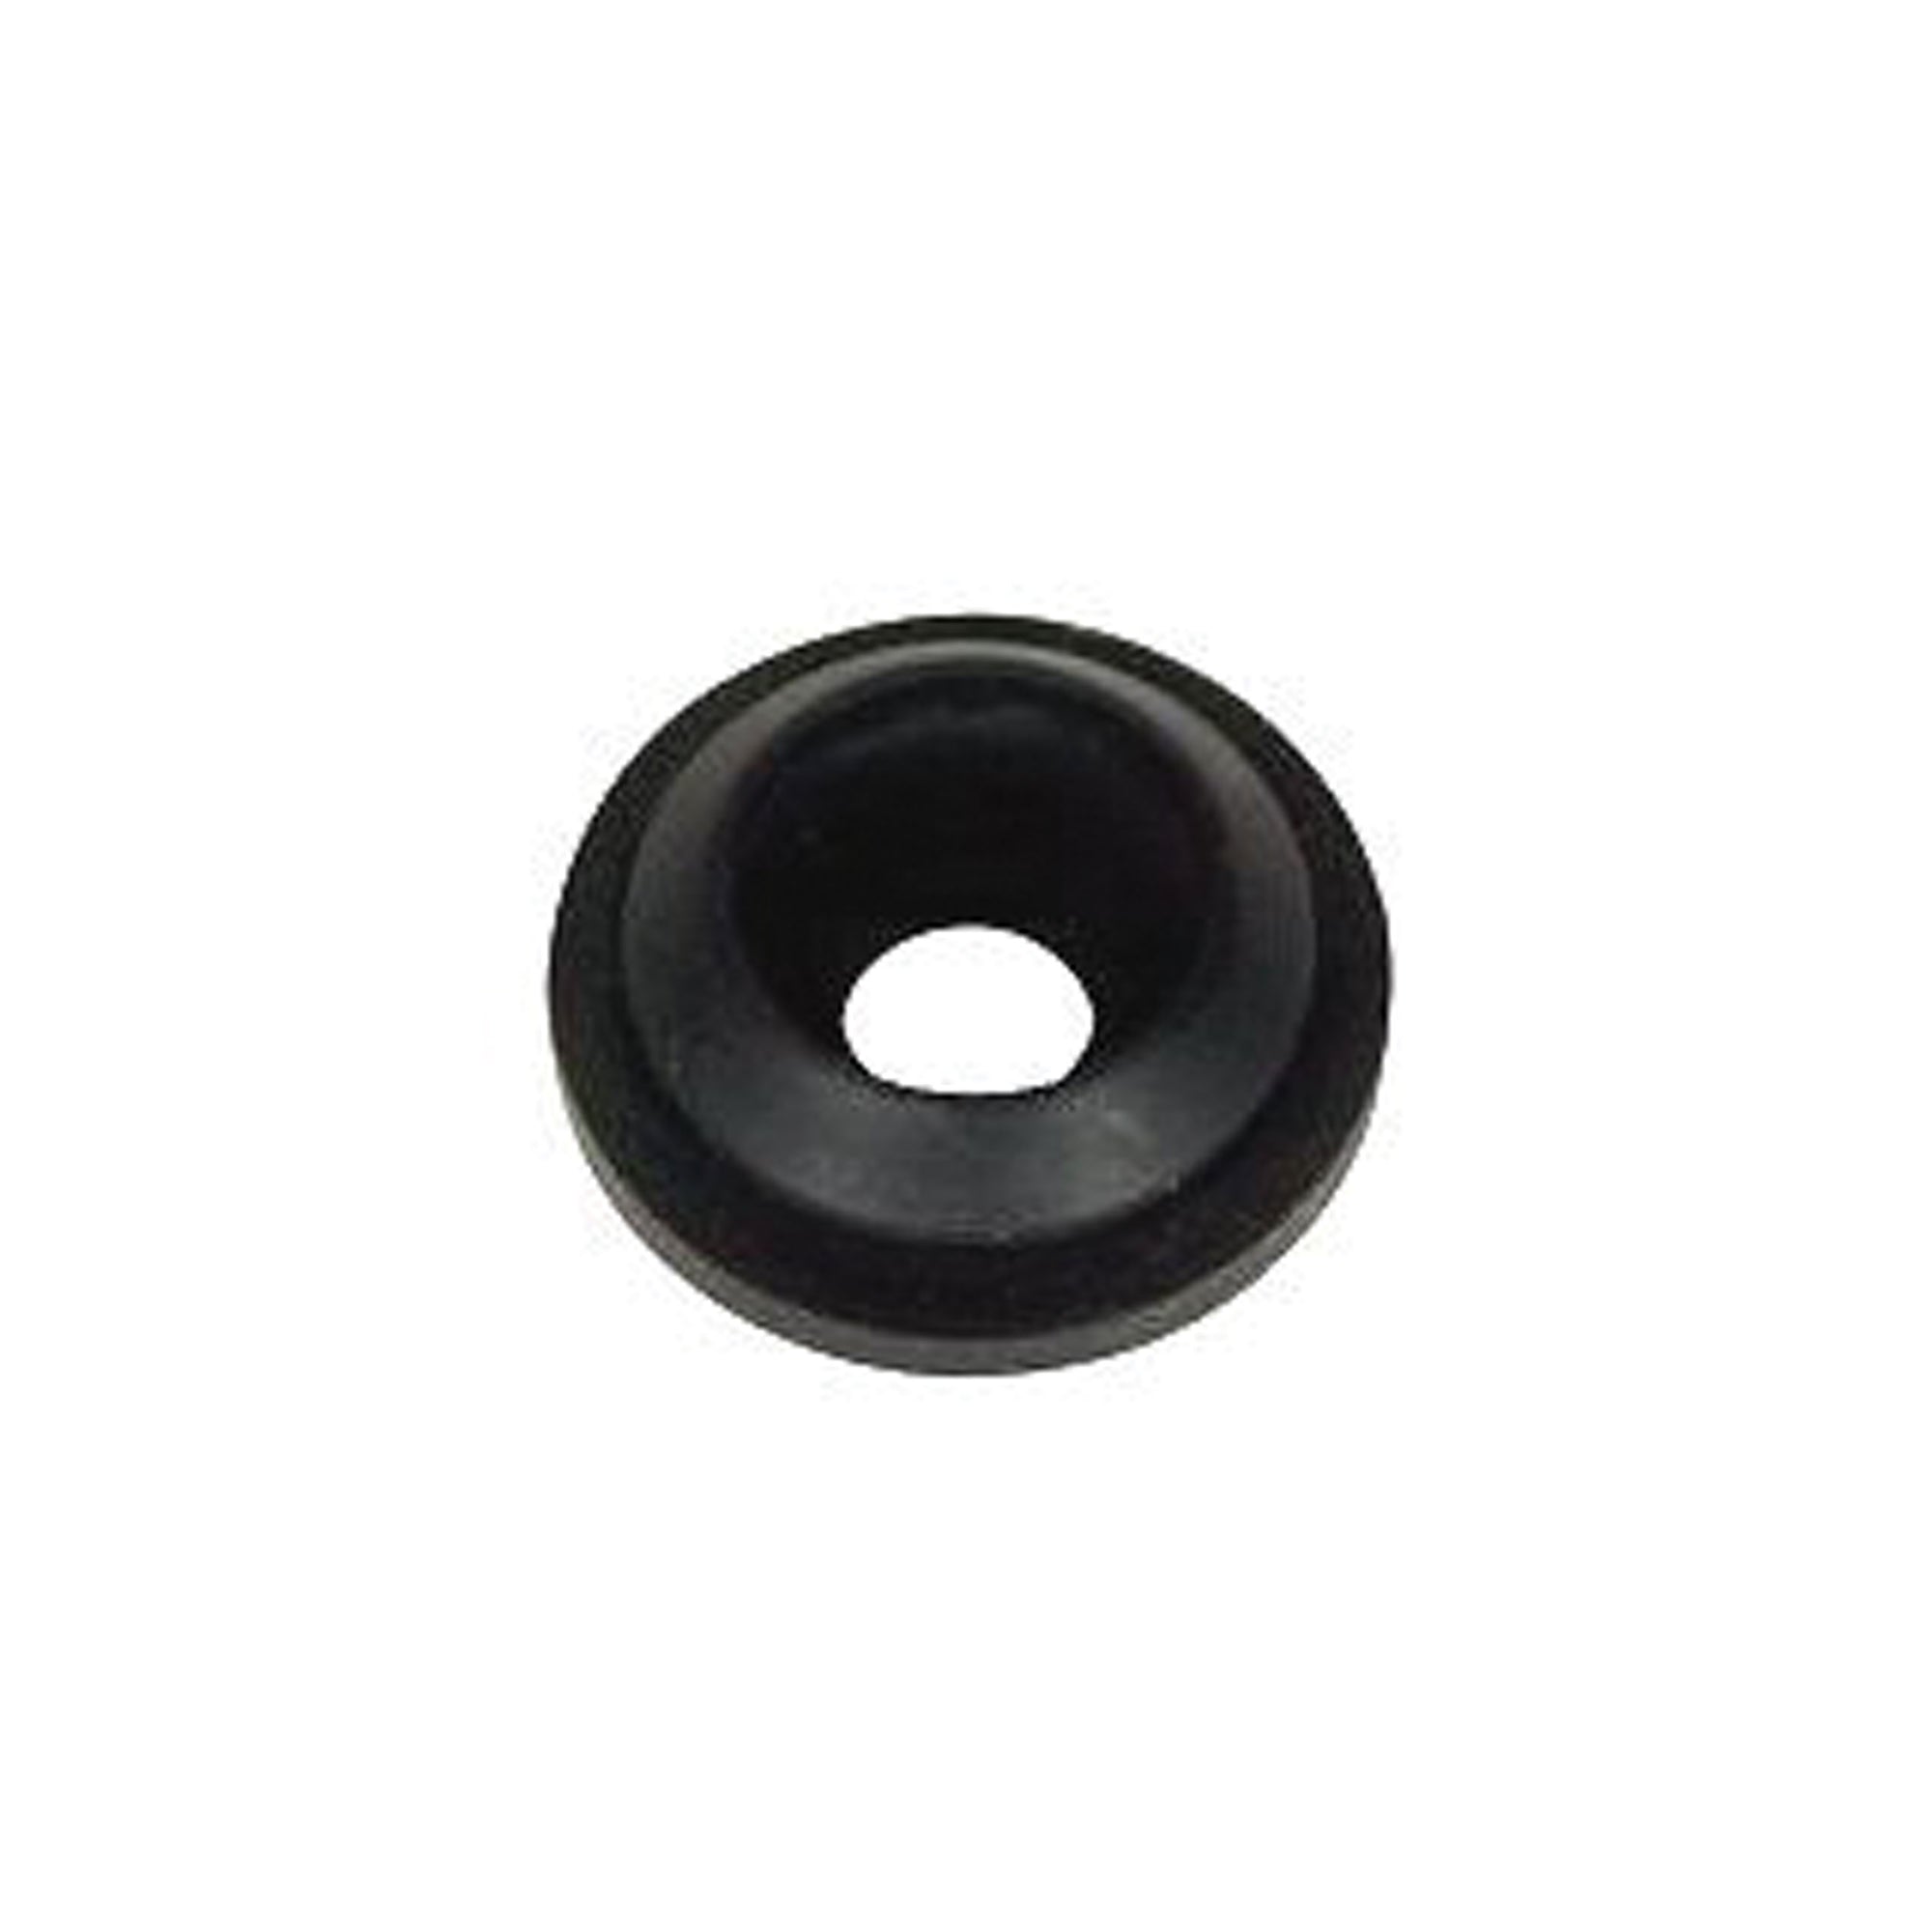 Atwood 57049 Rubber Grommet - 4 Pack